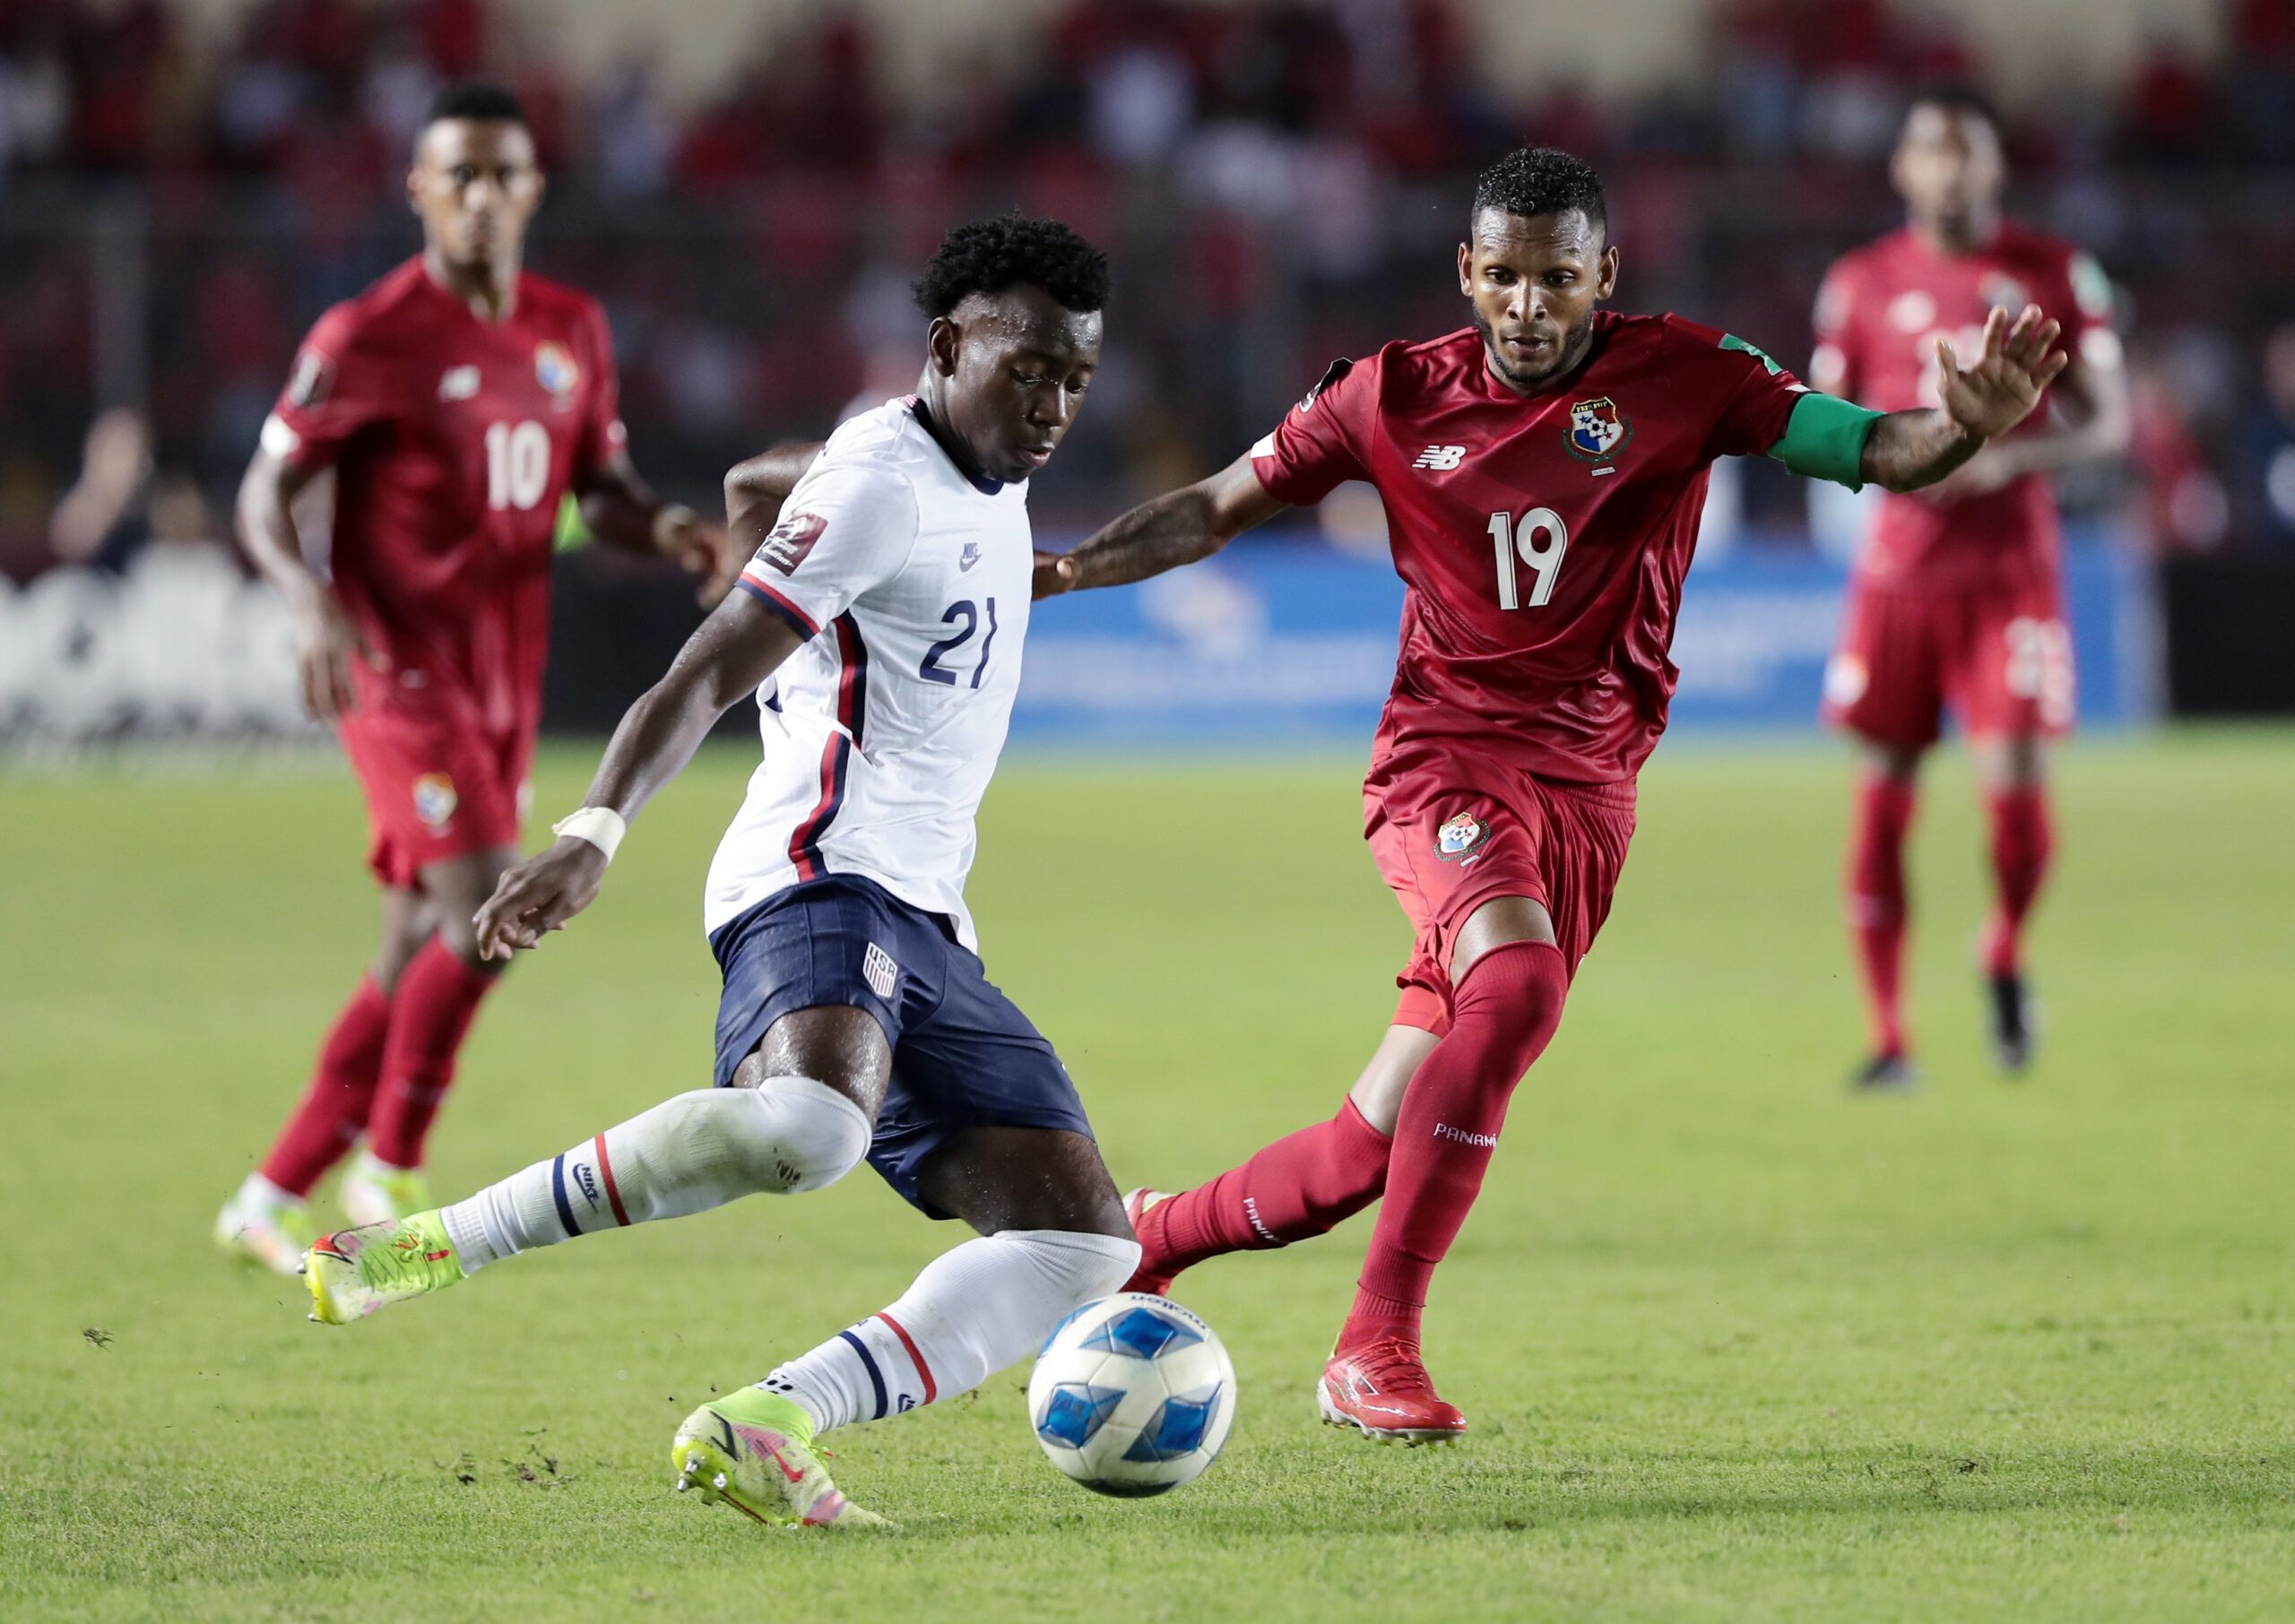 Soccer Football - World Cup - CONCACAF Qualifiers - Panama v United States - Estadio Rommel Fernandez, Panama City, Panama - October 10, 2021 George Bello of the U.S. in action with Panama's Alberto Quintero REUTERS/Erick Marciscano